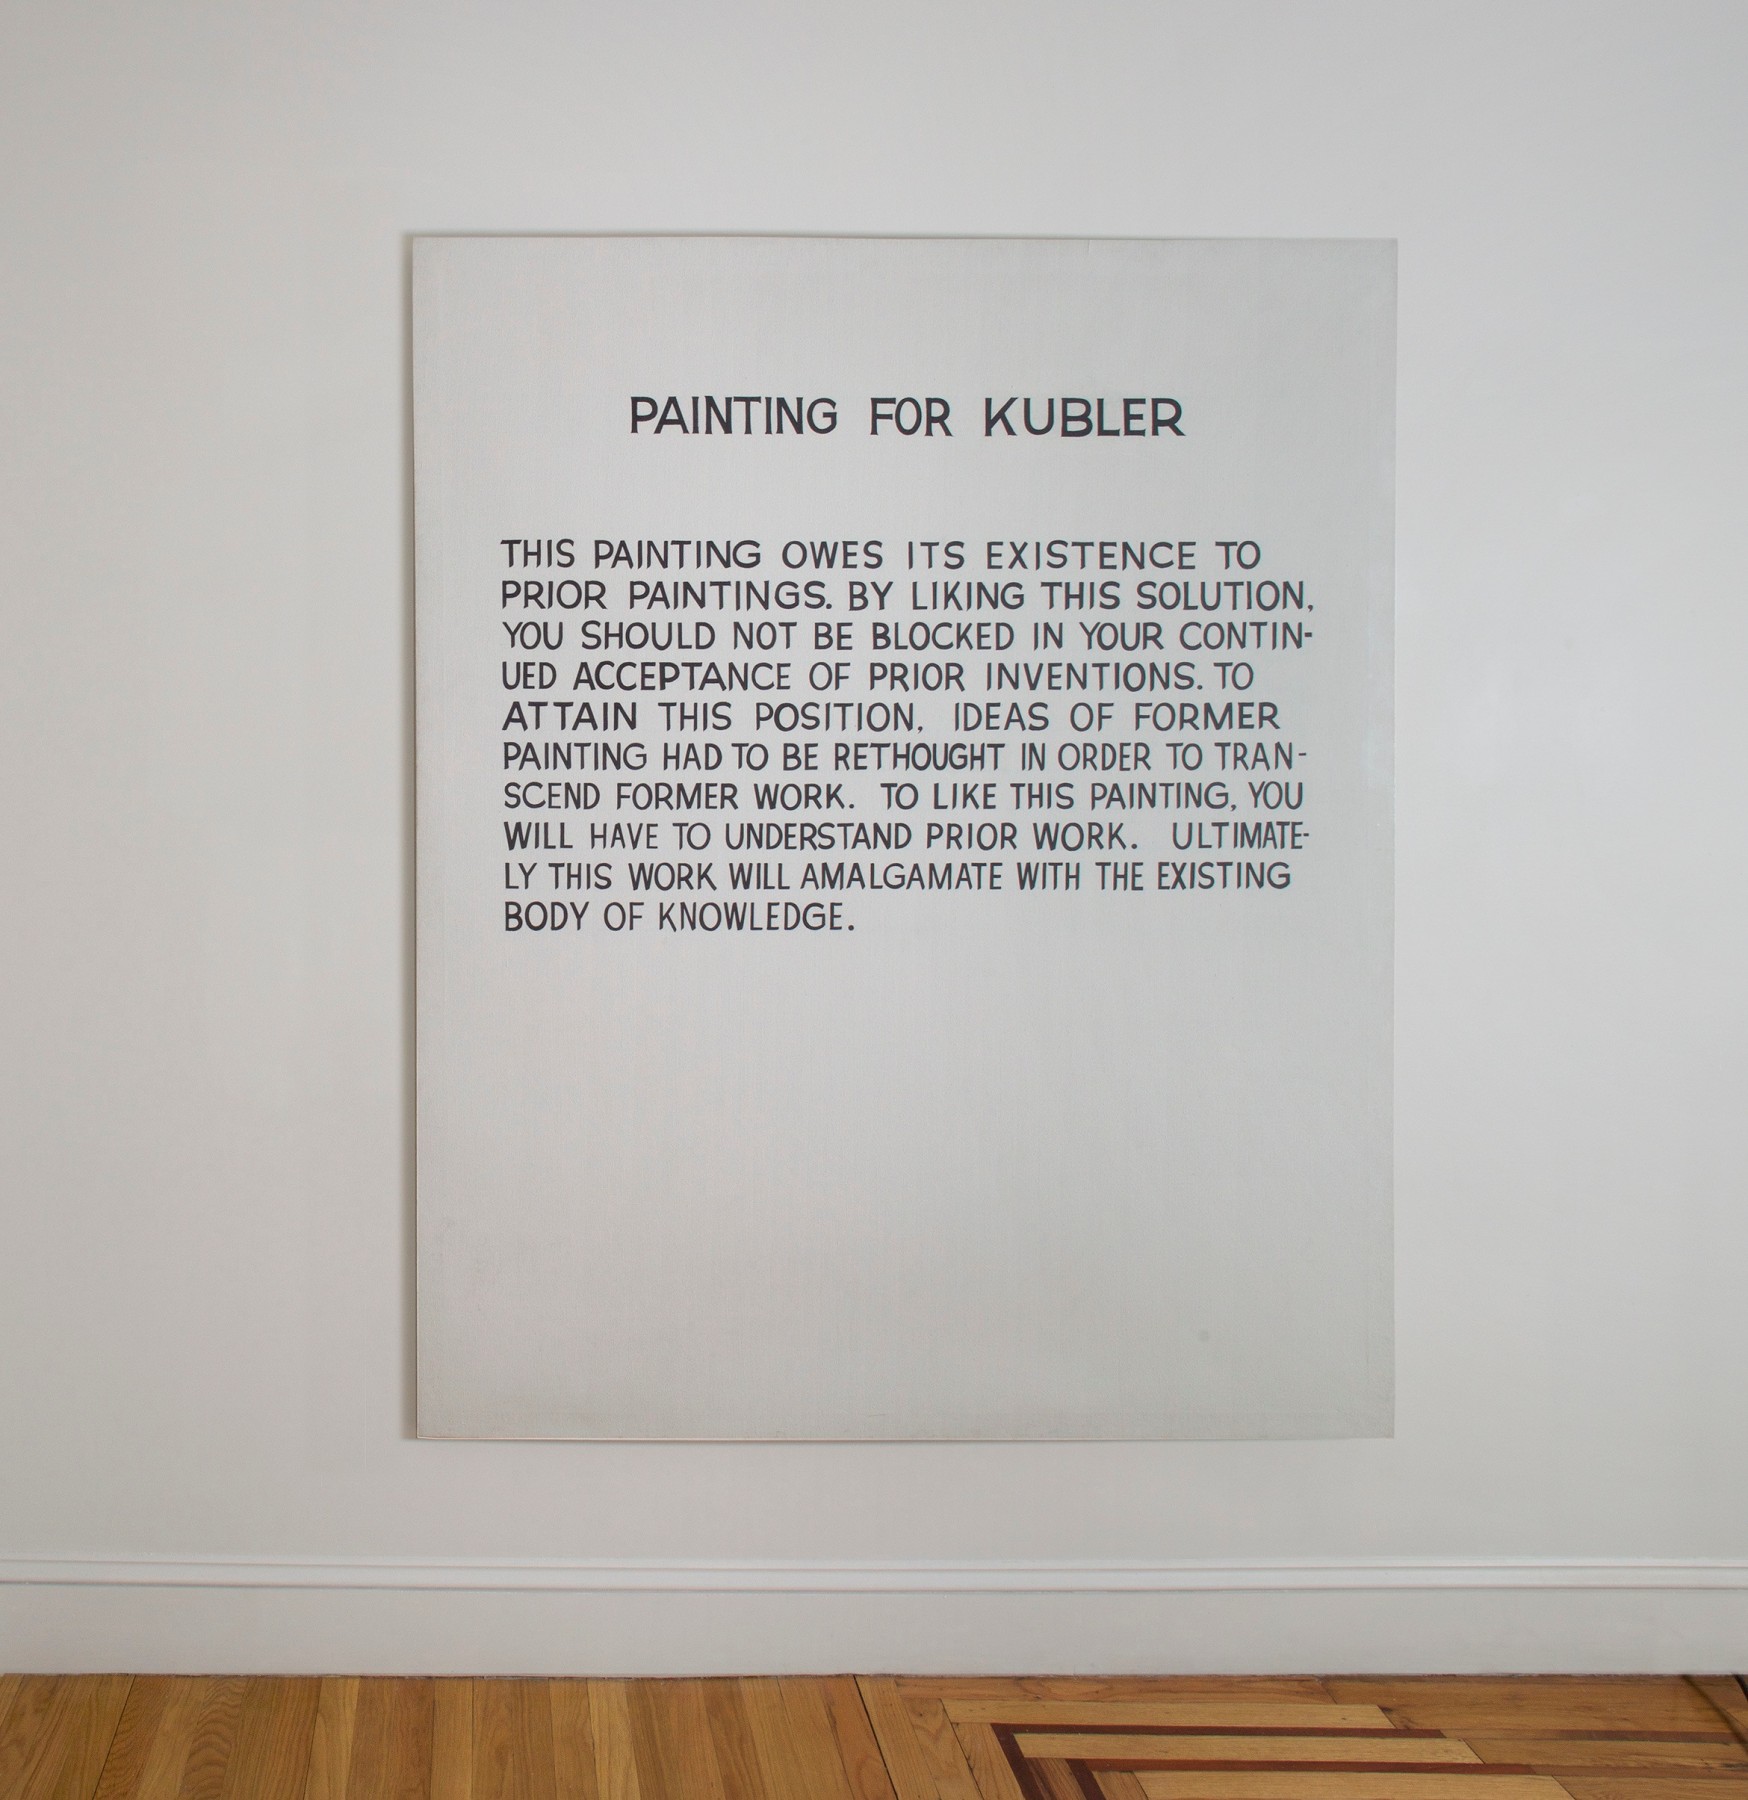 John Baldessari&nbsp;Painting for Kubler,&nbsp;1966-68. Acrylic on canvas. 68 x56 1&frasl;2 inches. Courtesy of the Hadley Martin Fisher Collection.